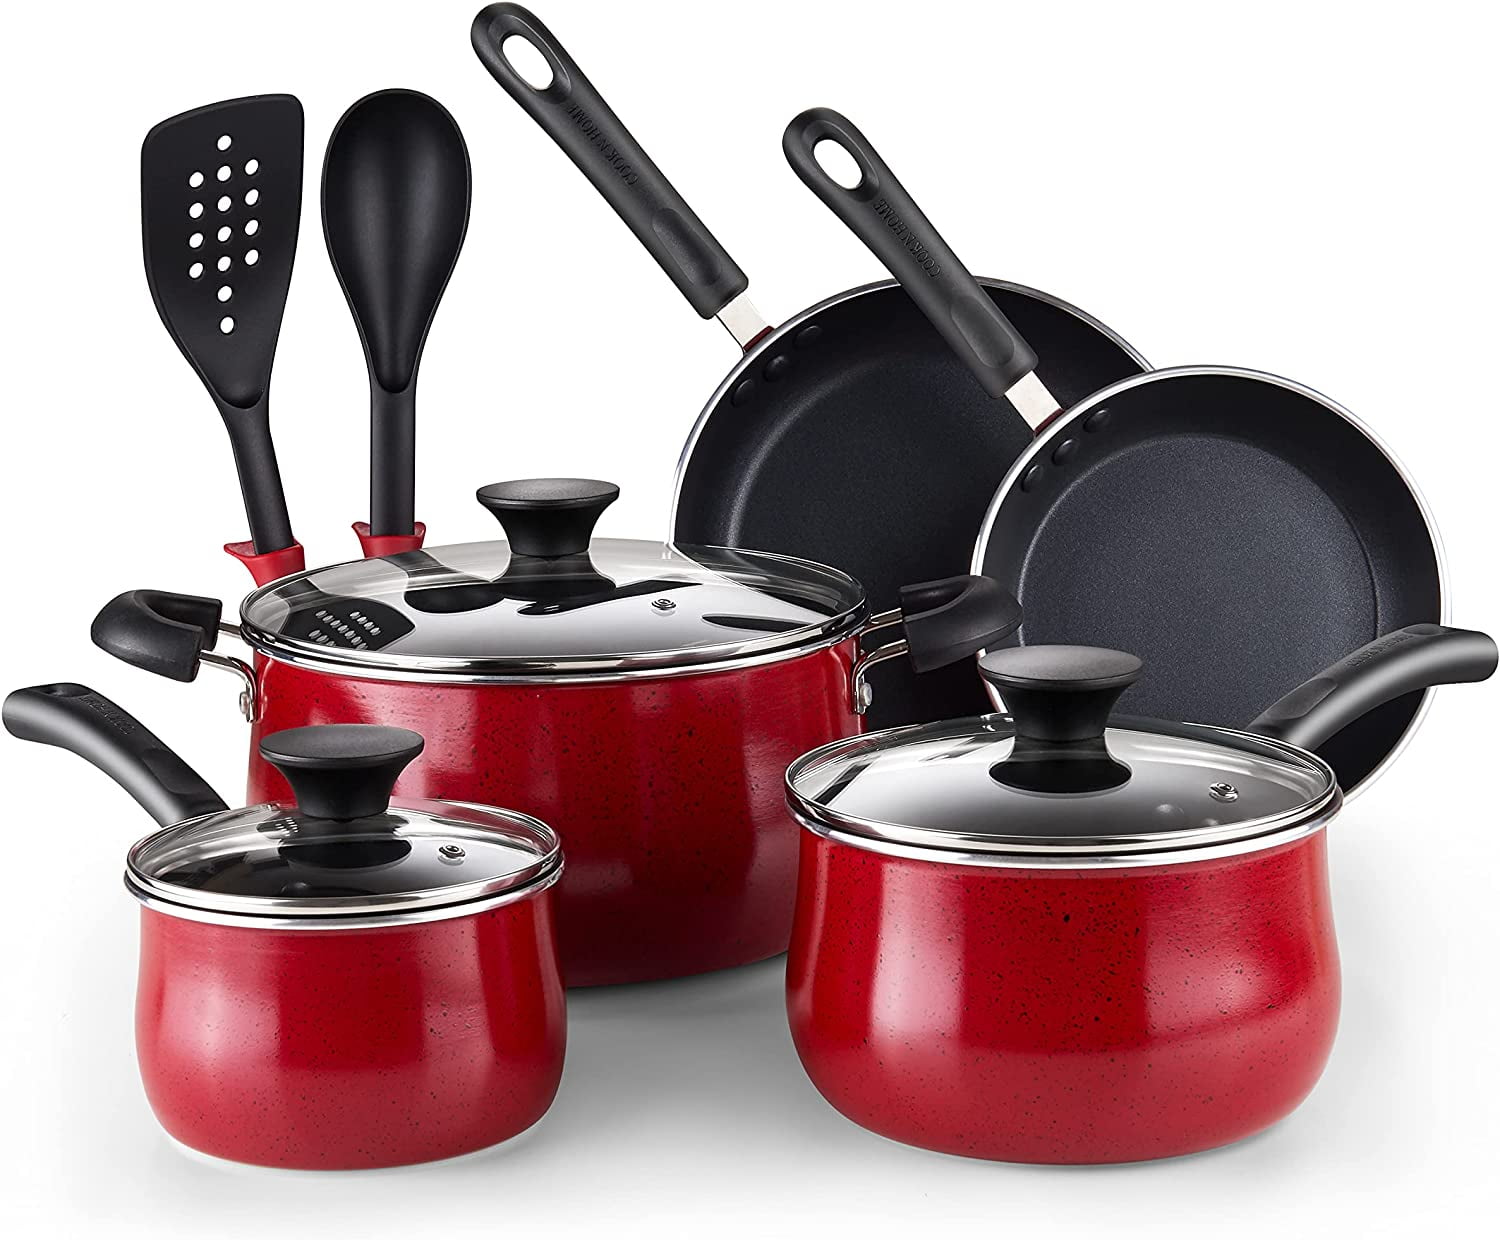 KENMORE Elite Andover 10-Piece Red Aluminum Non-Stick Cookware Set with Lids  985114036M - The Home Depot